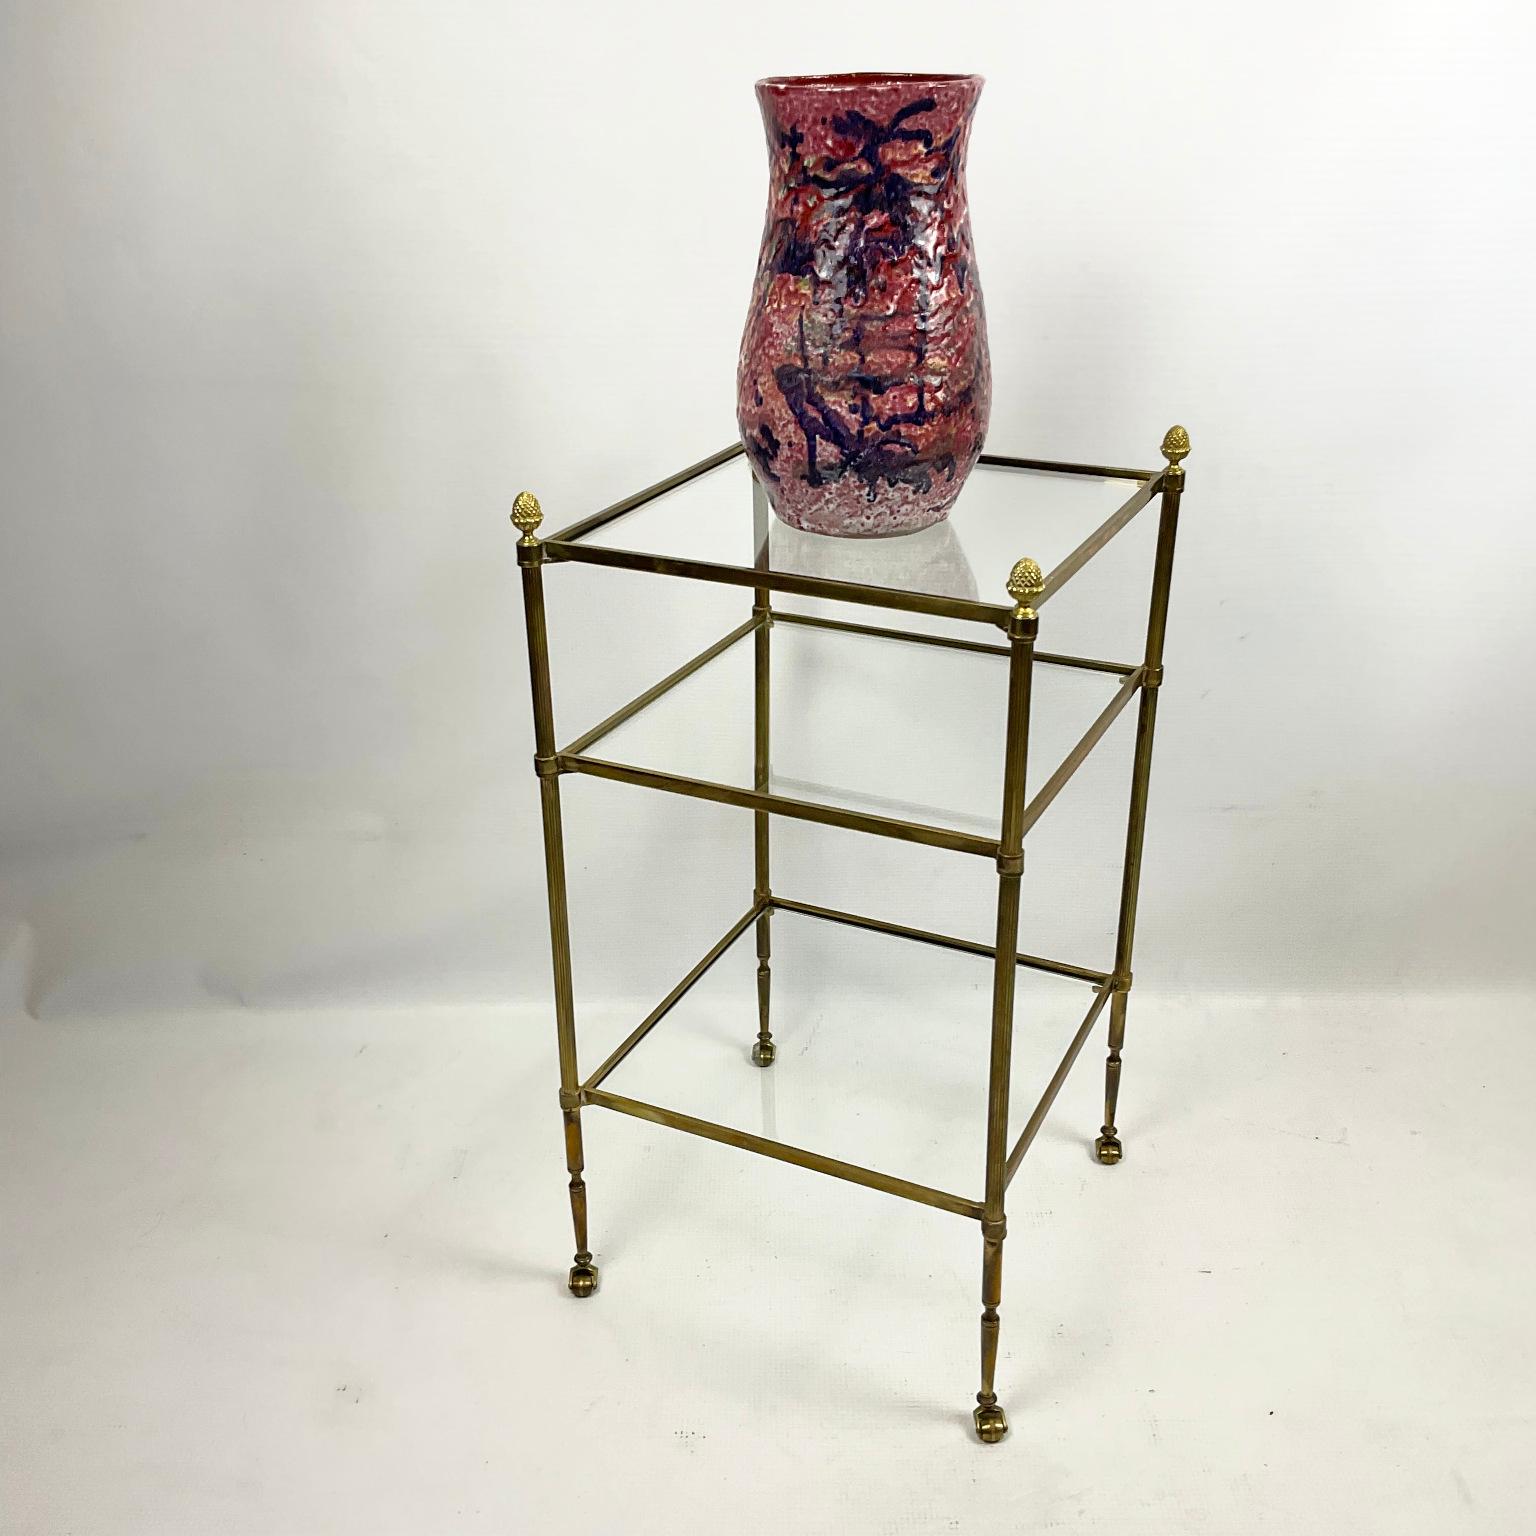 1960s Brass Side Table with Pine Cones Decor Attributed to Maison Jansen France In Good Condition For Sale In London, GB